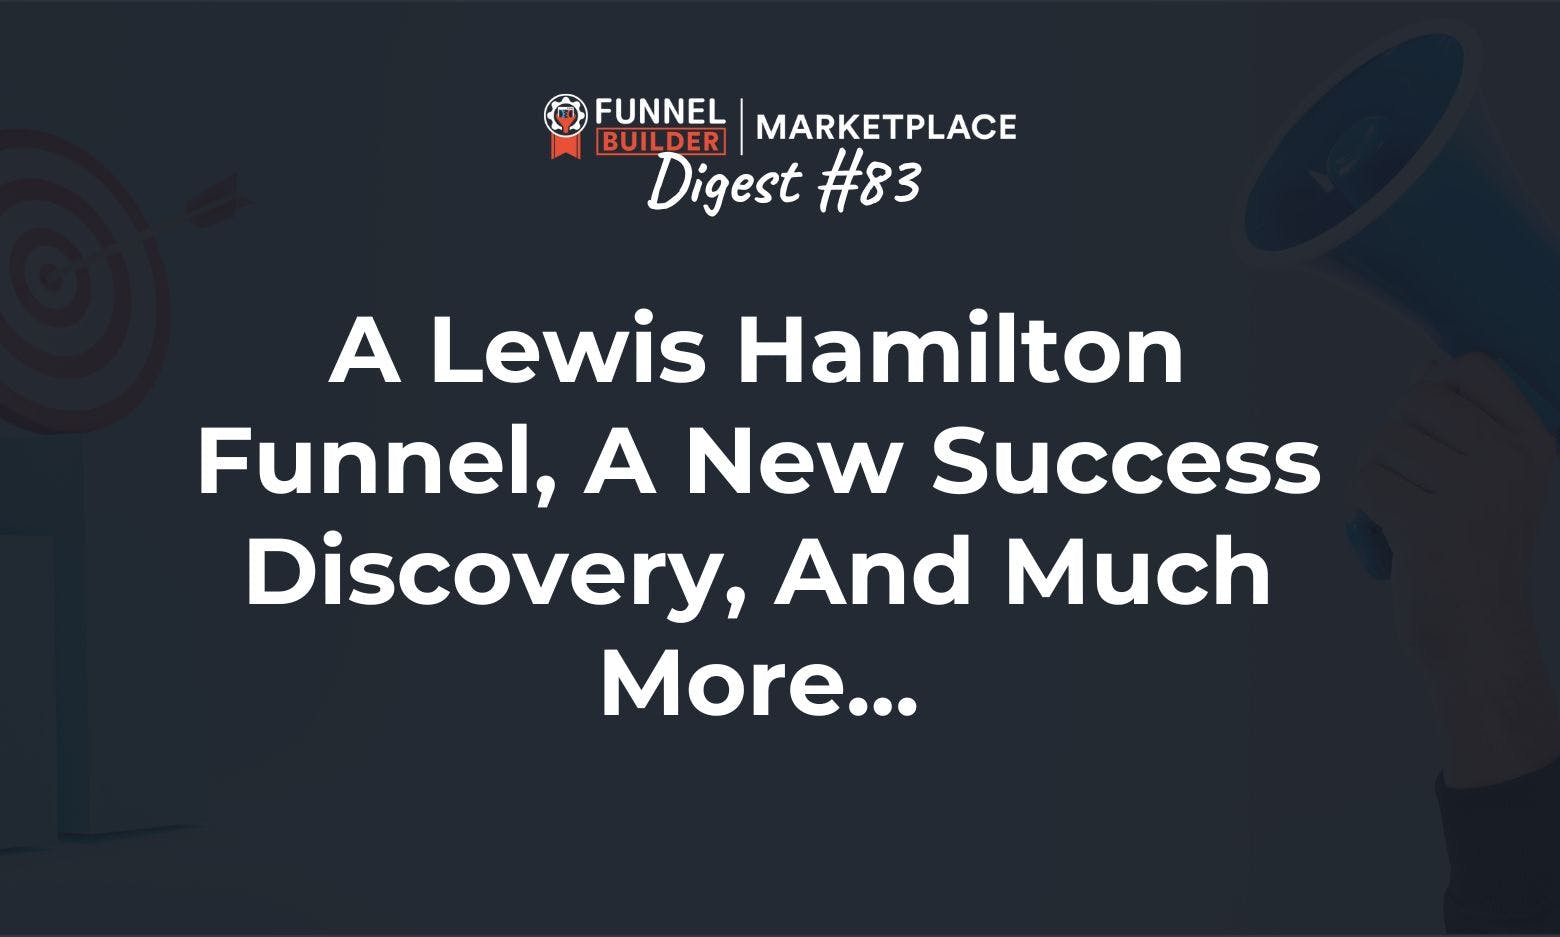 FBM Digest #83: A Lewis Hamilton funnel, a new success discovery, and much more...